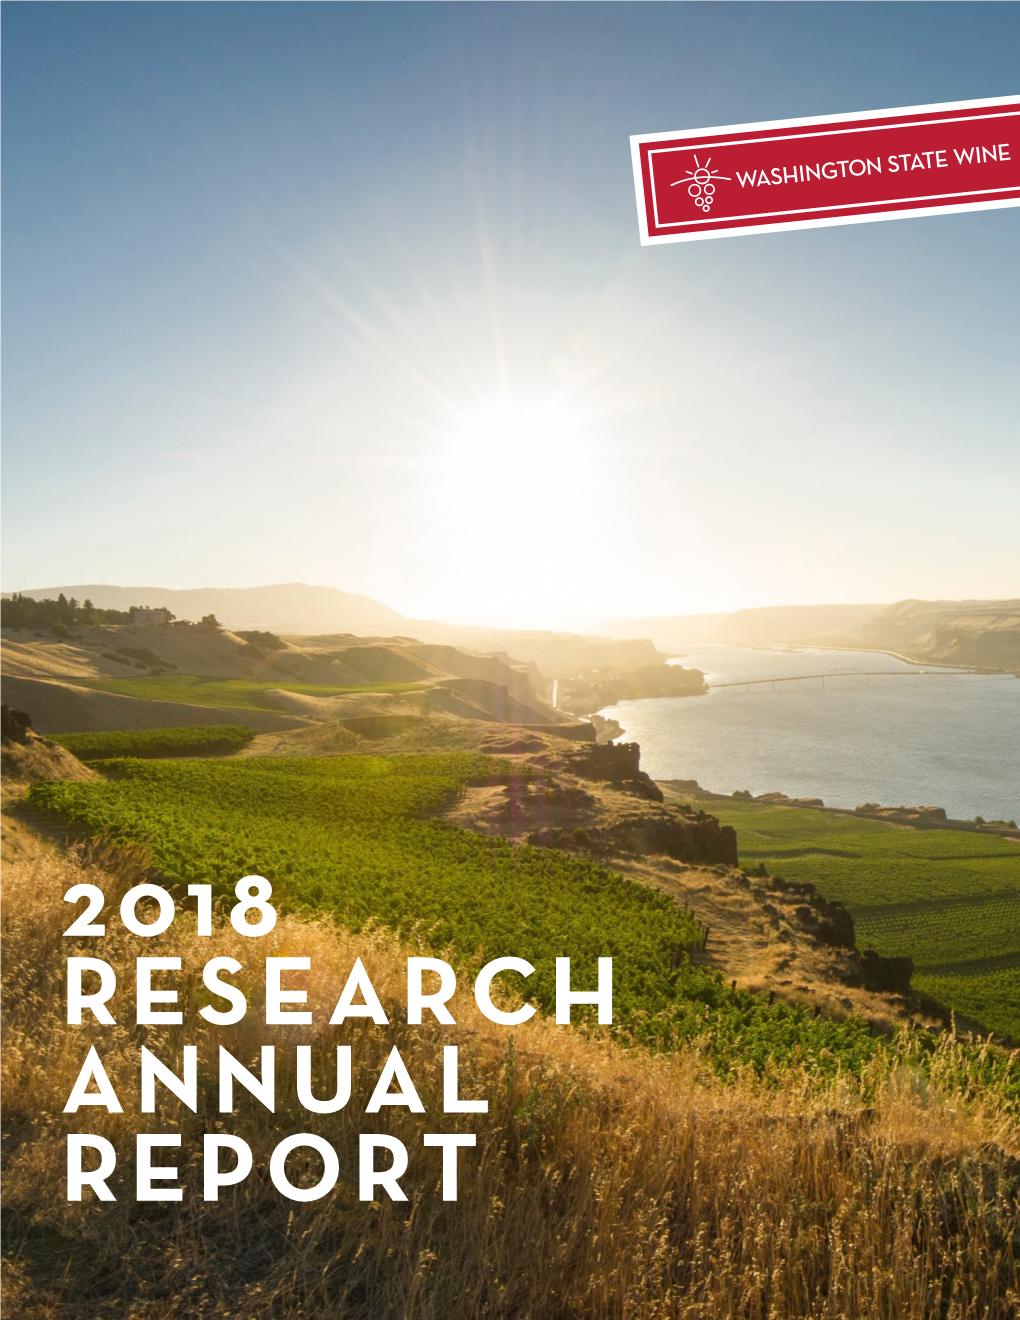 2018 RESEARCH ANNUAL REPORT Dear Washington State Wine Industry Colleagues and Friends